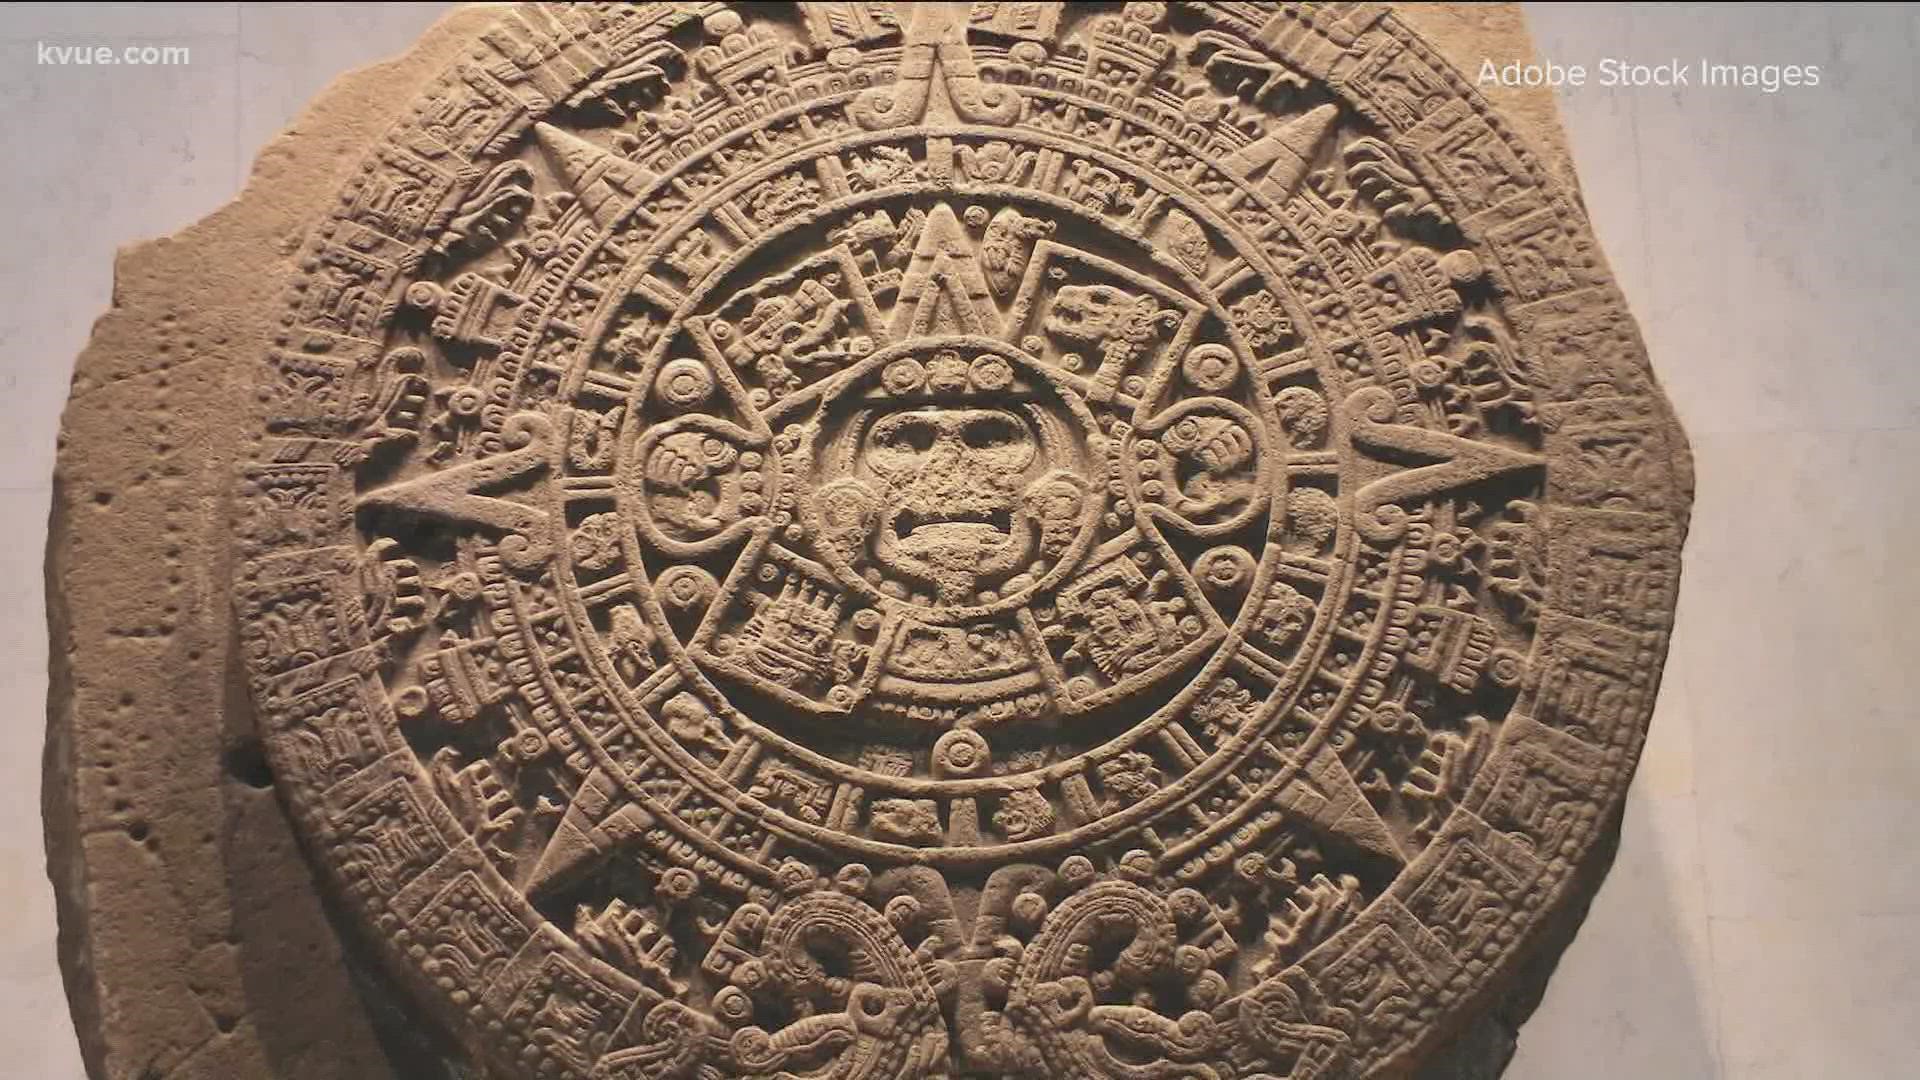 A team of archaeologists, including a University of Texas at Austin researcher, discovered the earliest known record of the 260-day Mayan calendar system.